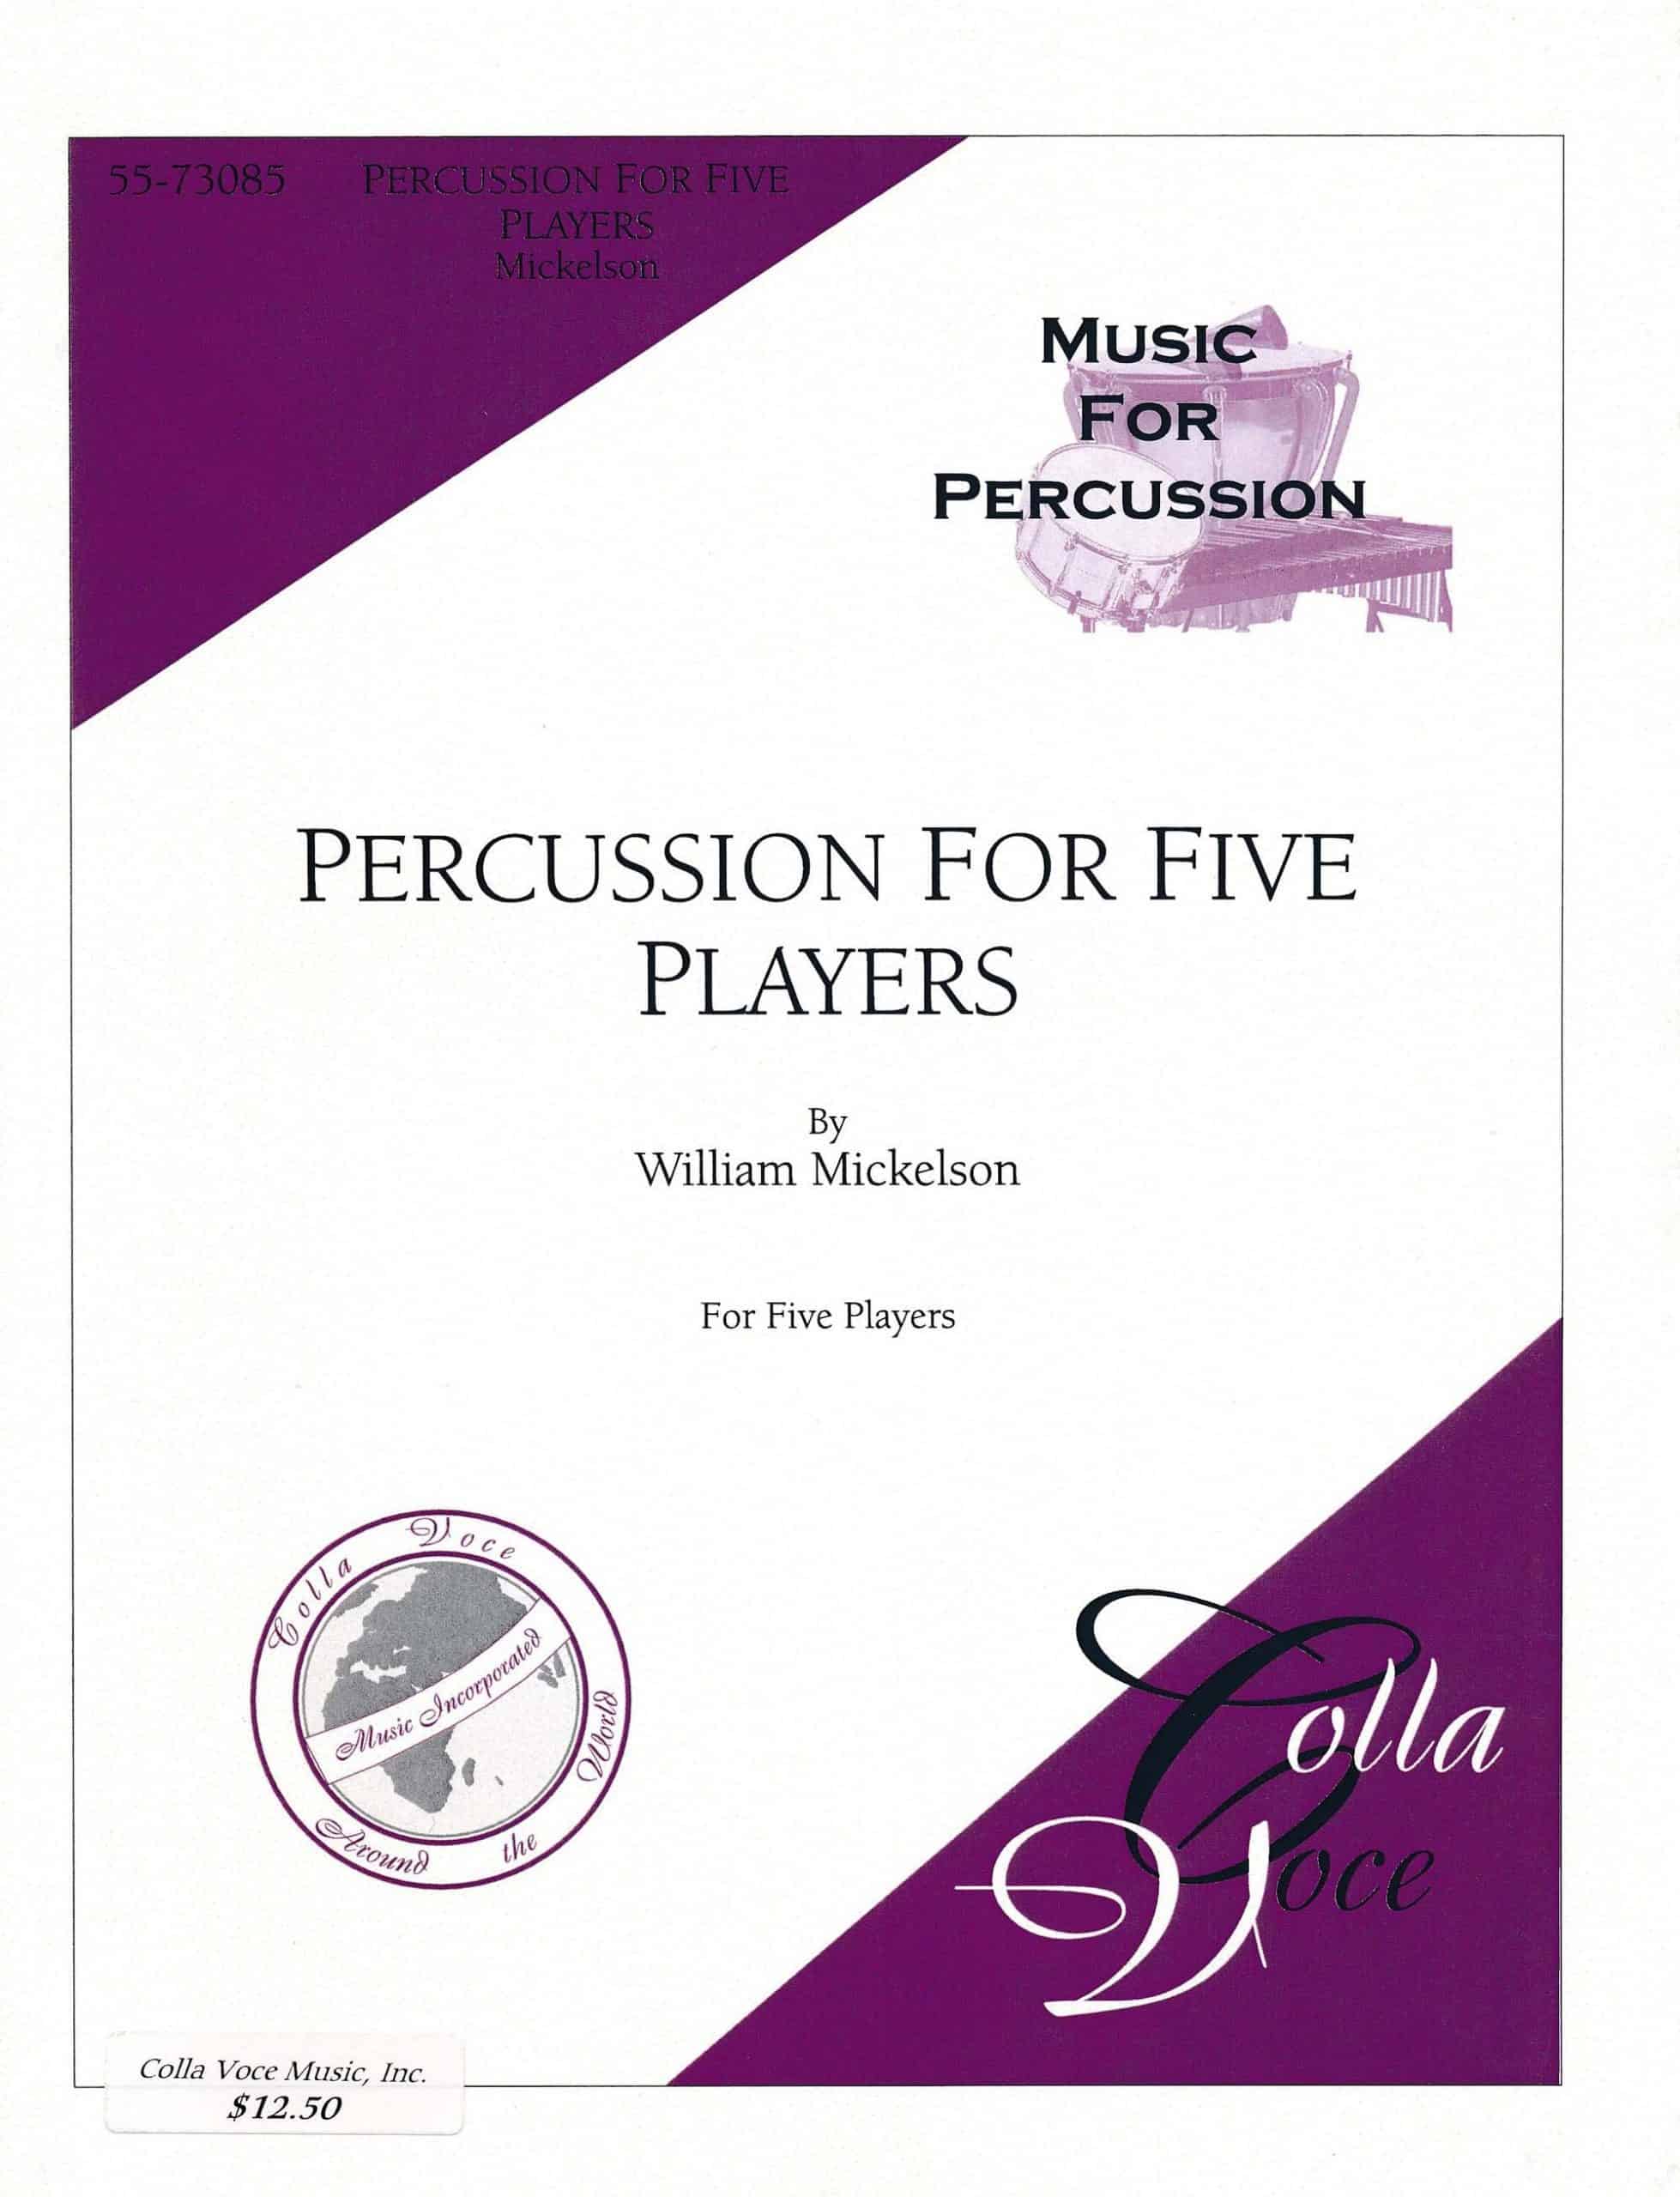 Percussion For Five Players by William Mickelsen